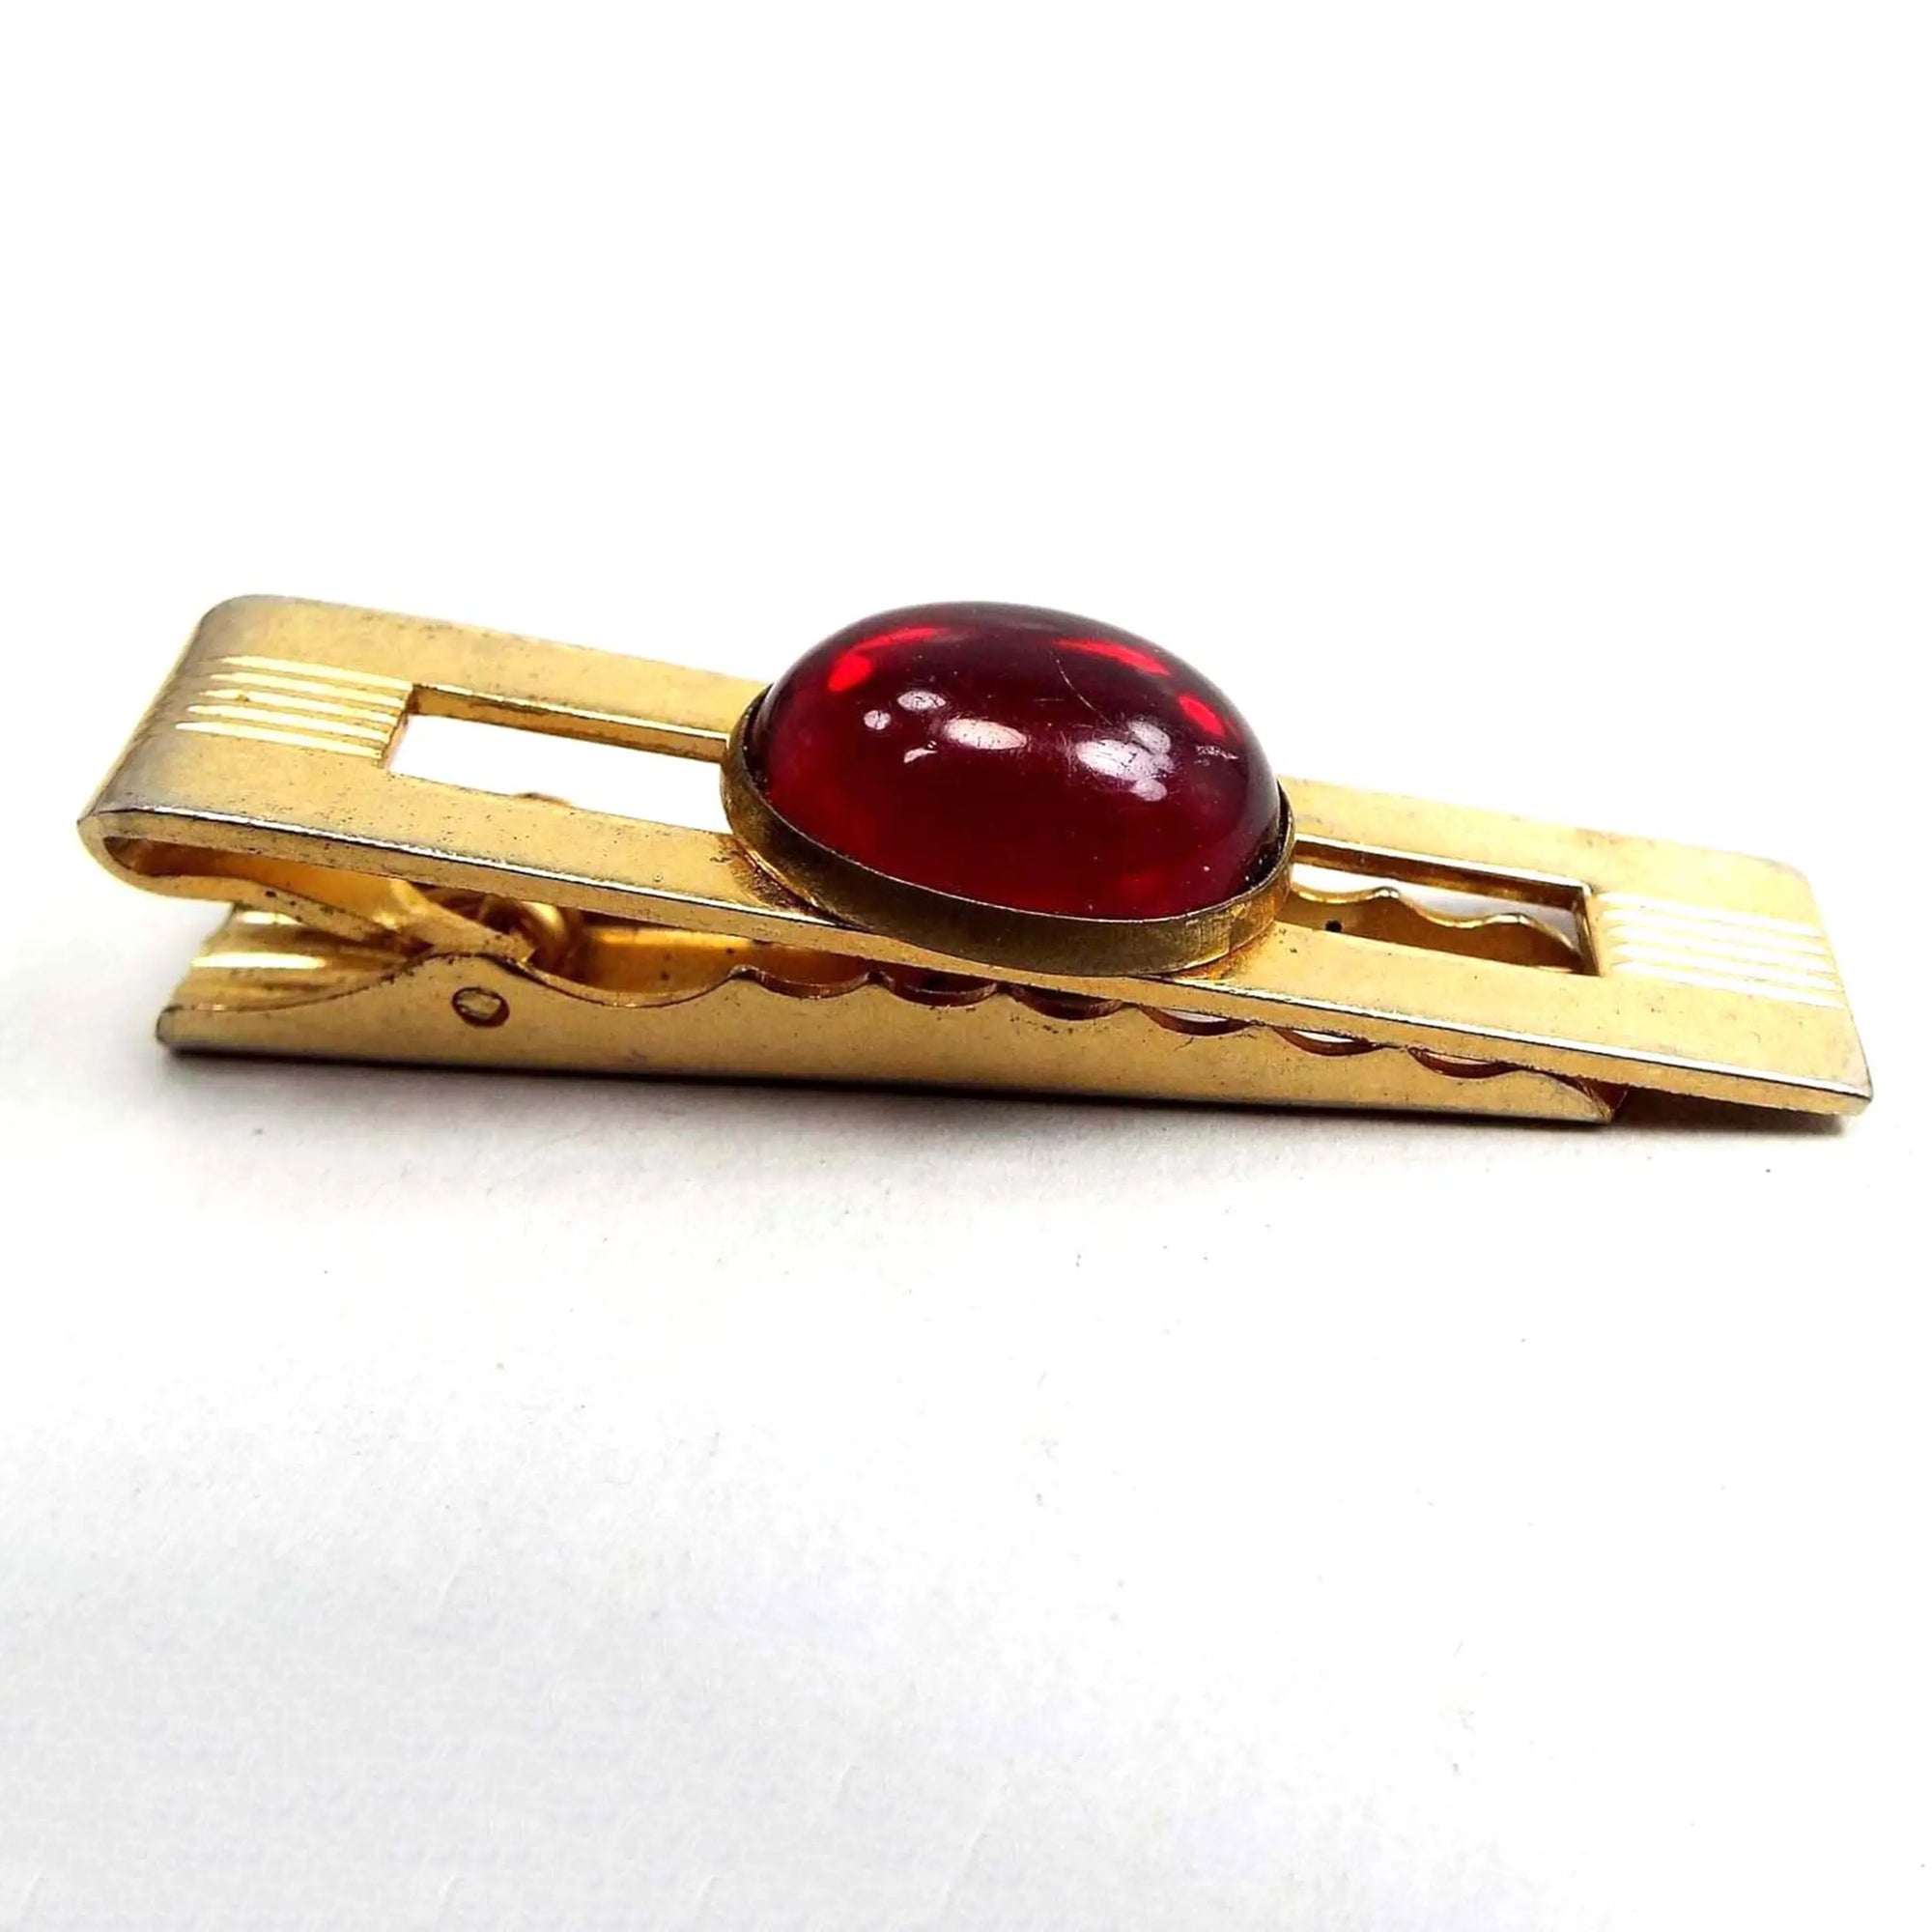 Angled side and front view of the Anson Mid Century vintage lucite tie clip. The metal is gold tone in color. There is an open cut out rectangle in the middle. Over that is an oval bezel set red lucite cab. There are etched lines on the metal on each end. The back has an alligator style clip.